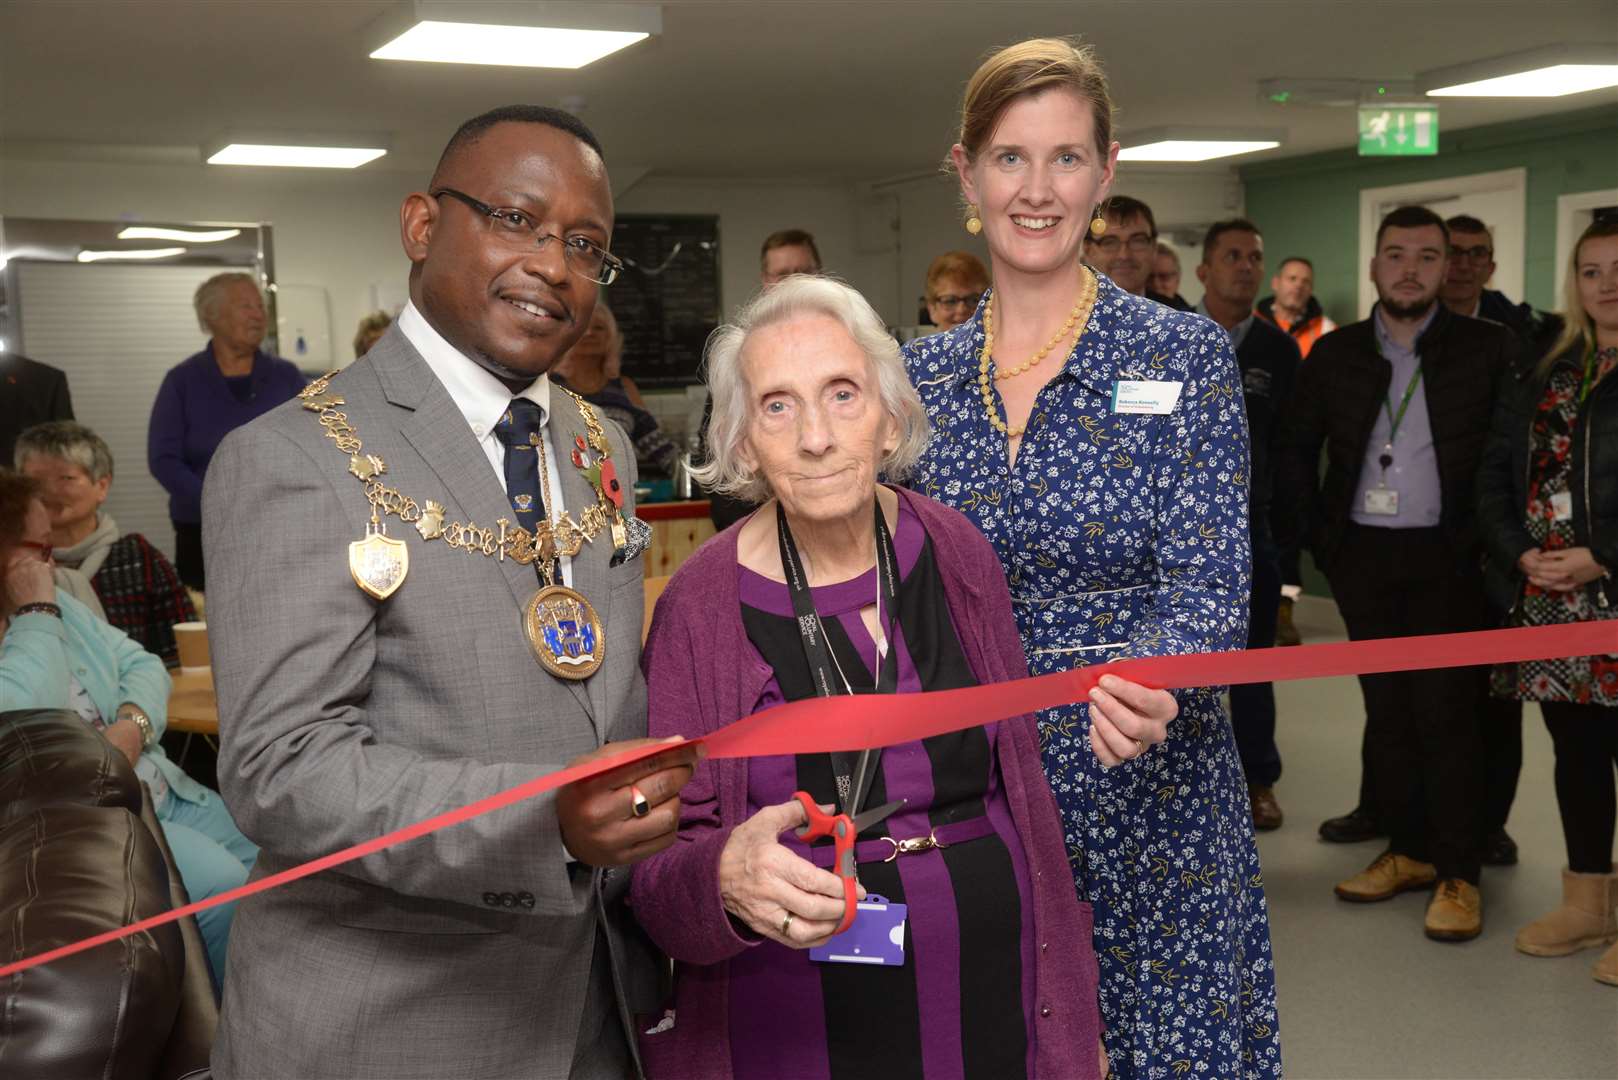 Mayor of Medway Cllr Habib Tejan, Lillian Lyons and Rebecca Kennelly, Director of Volunteering at the opening of the RVS centre at the Victory Community Centre in Brompton Hill on Tuesday. Picture: Chris Davey. (21479936)